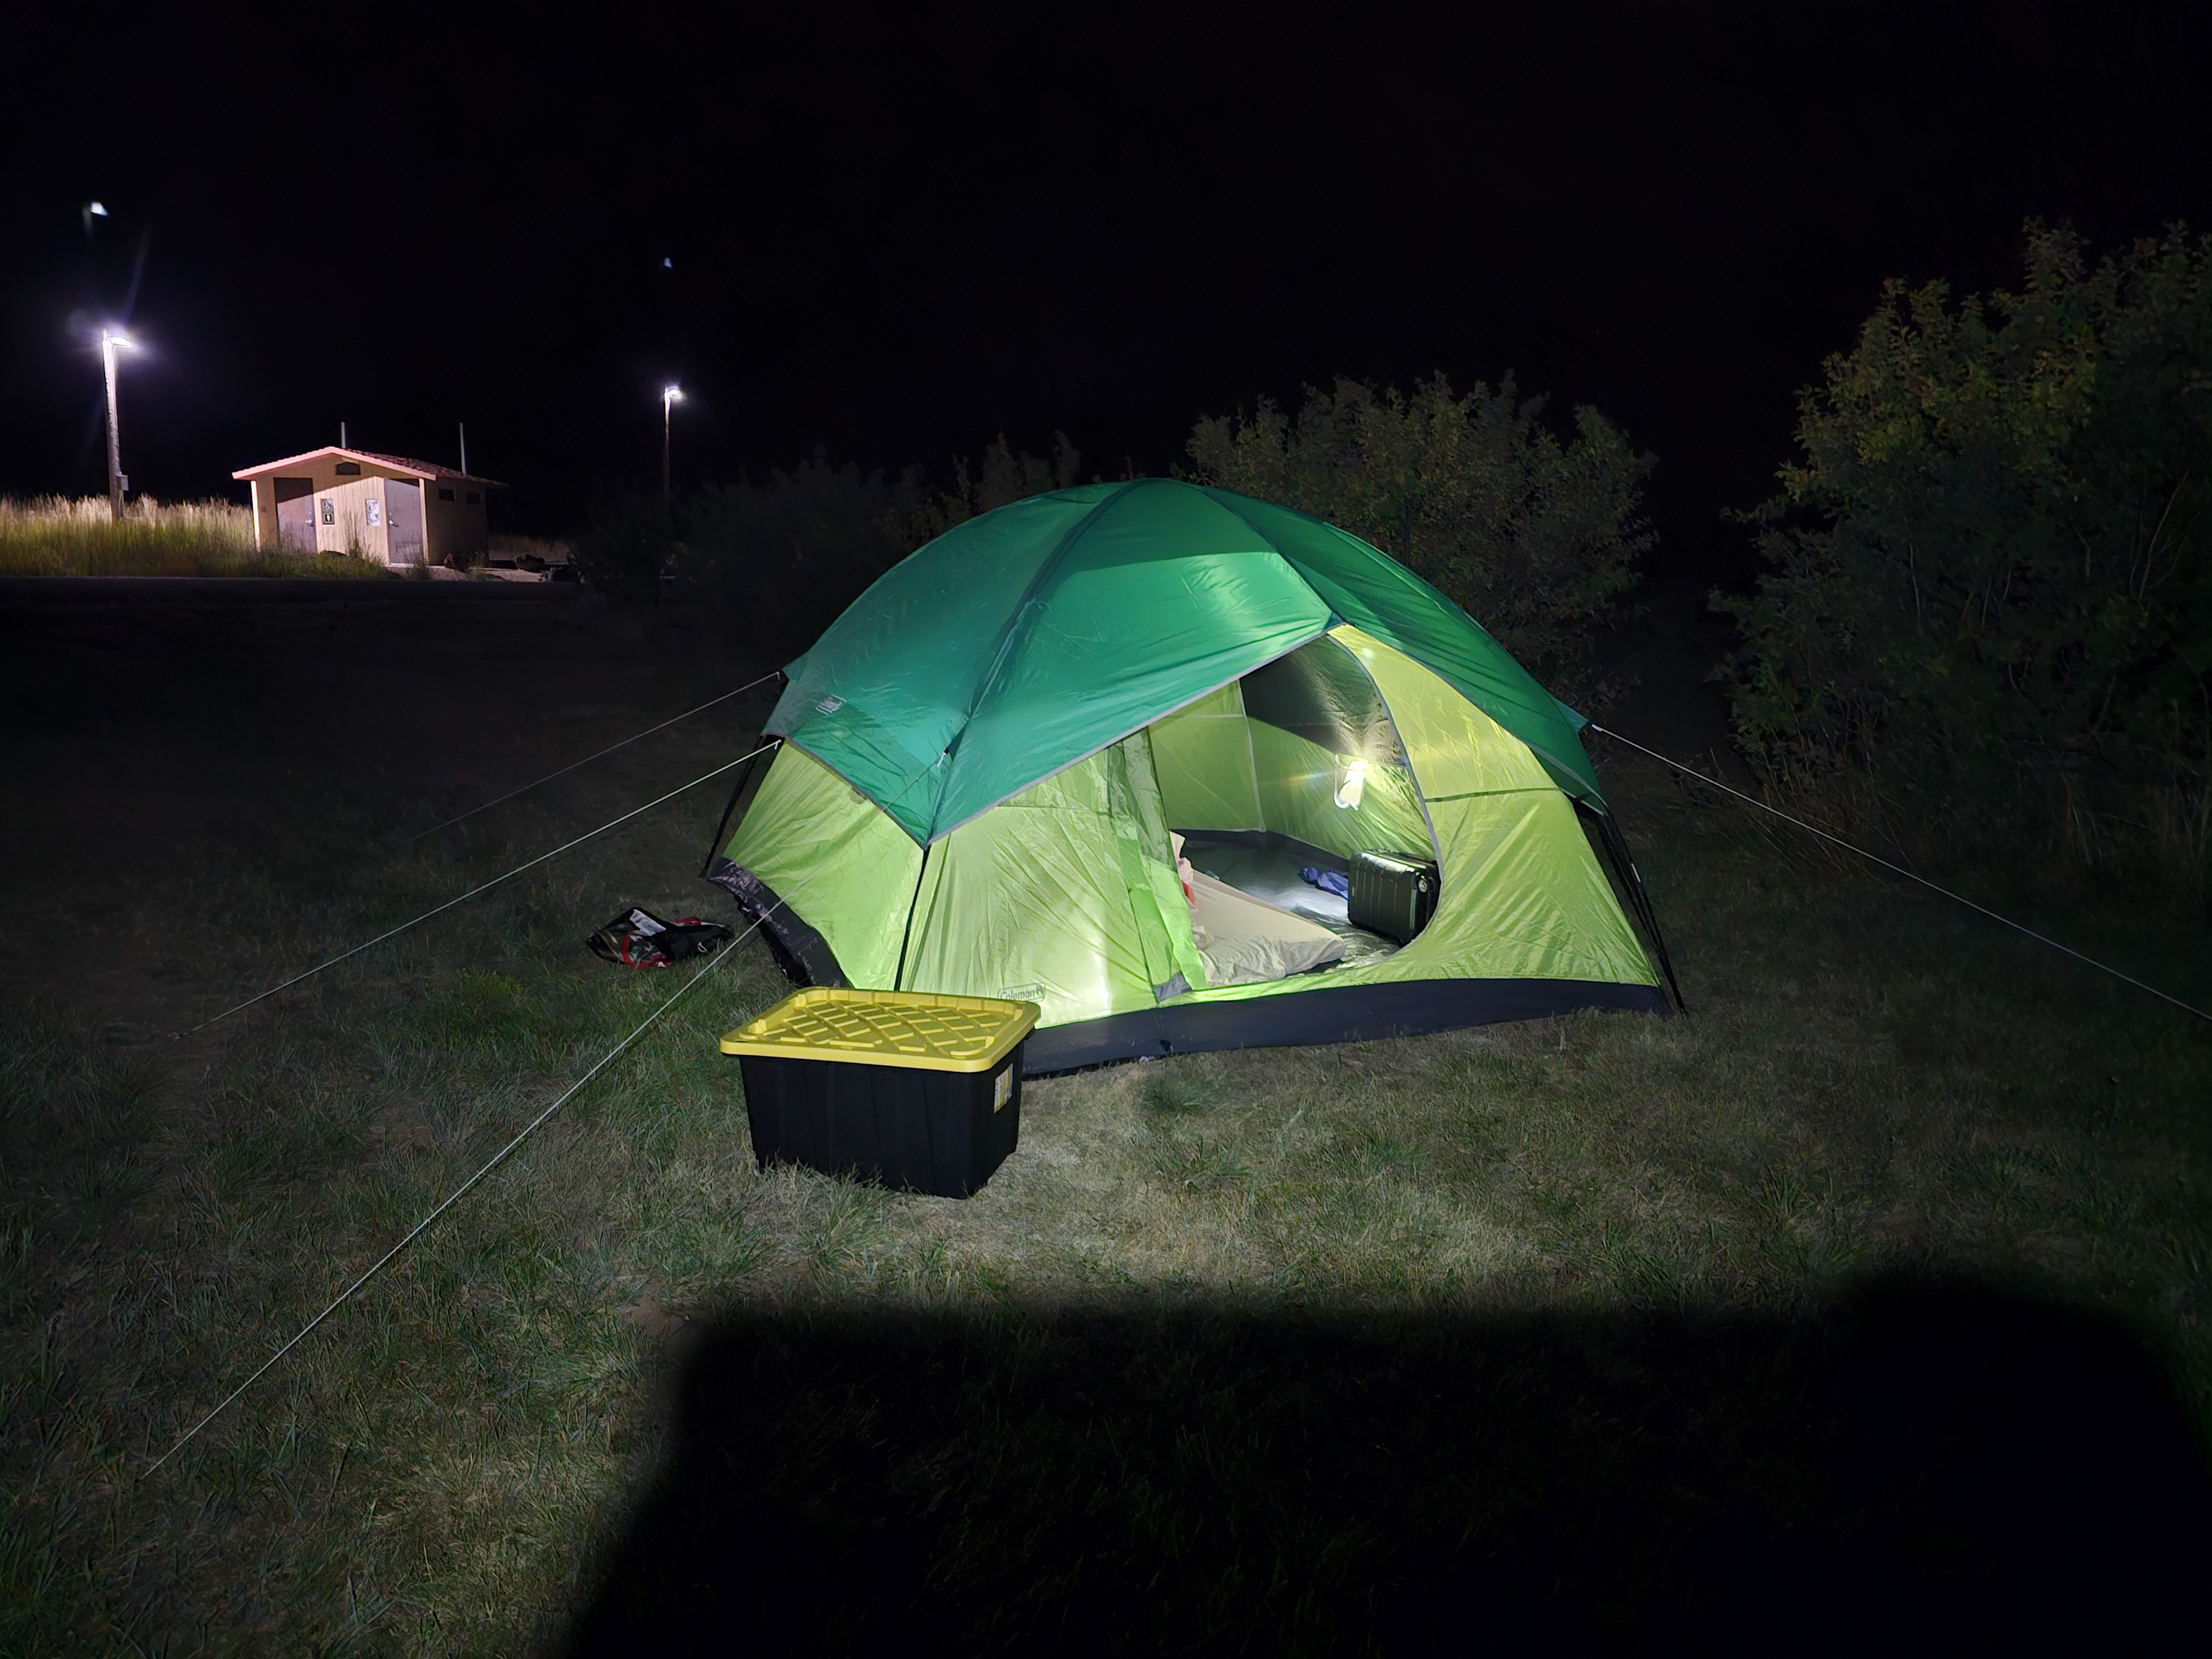 Here is one of our camping setups that we had in Wyoming.